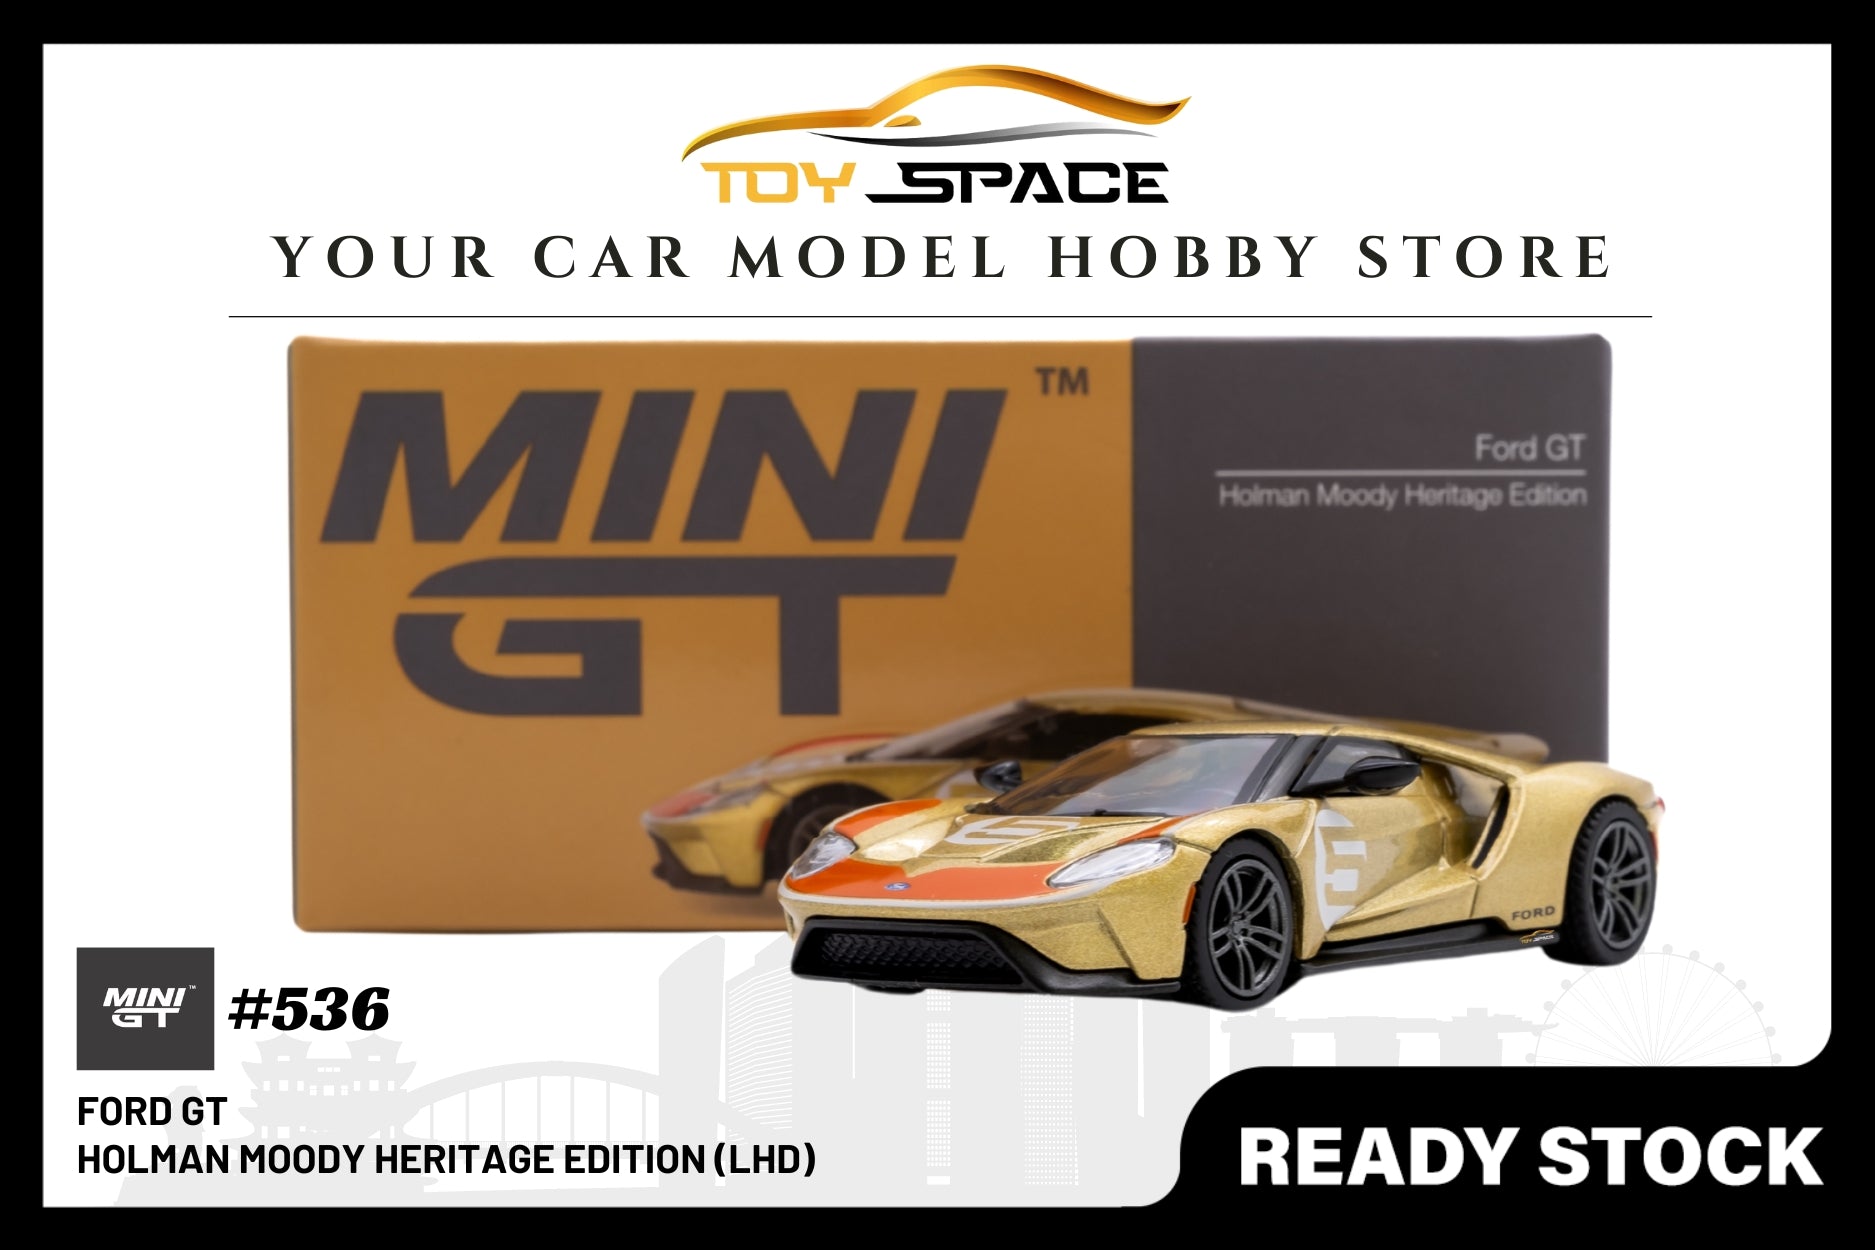 Mini GT Ford GT Holman Moody Heritage Edition (LHD)